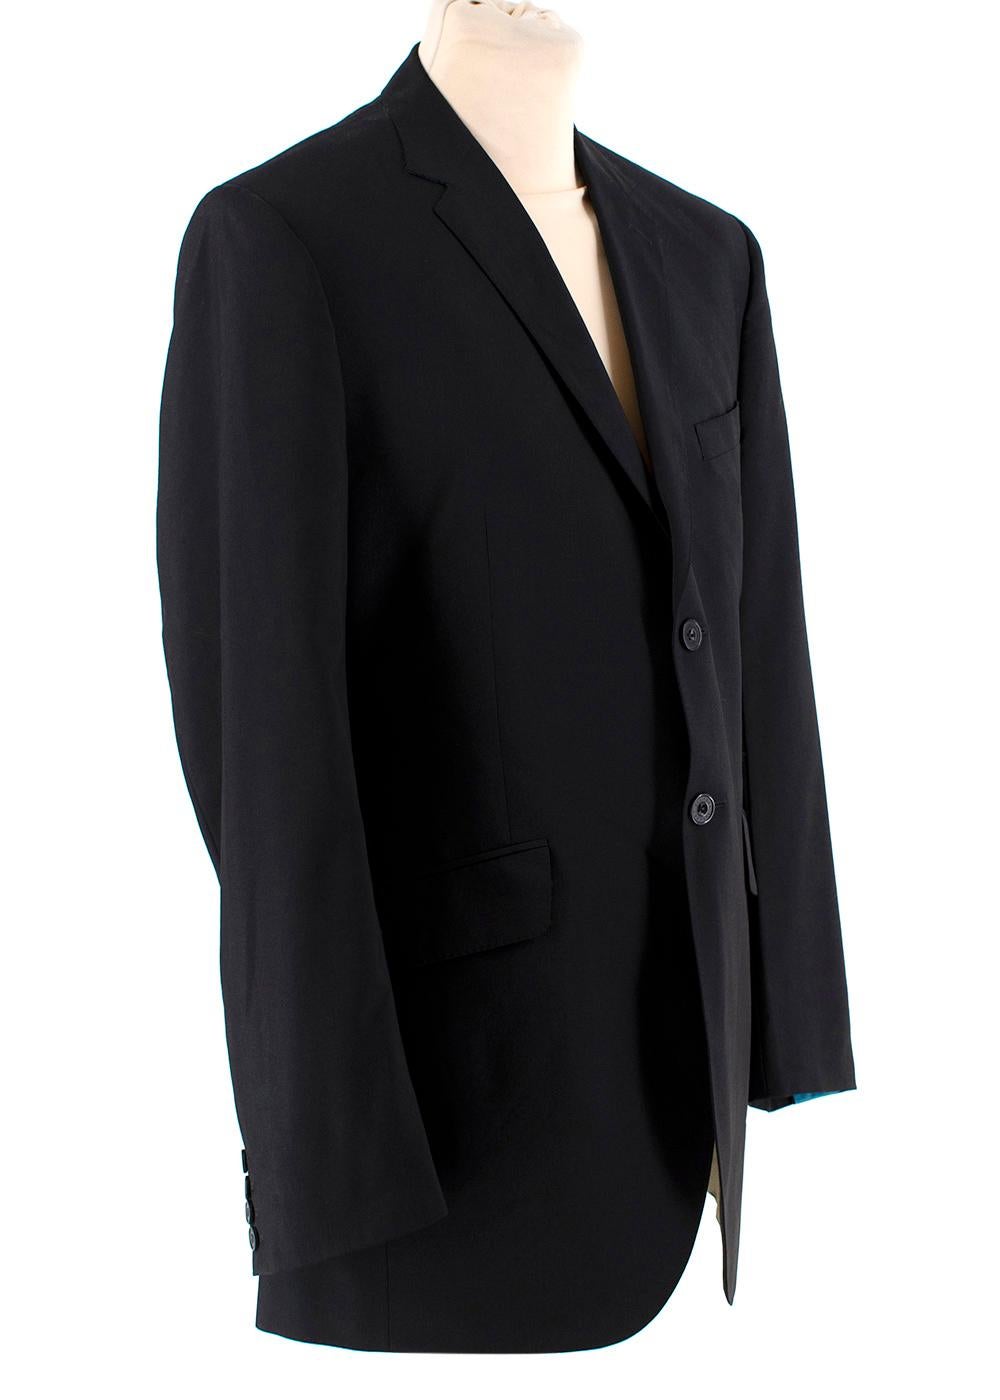 Ozwald Boateng Black Wool Blend Single Breasted Blazer Jacket

-Made of a lightweight wool fabric 
-Classic single breasted cut 
-3 pockets to the front 
-Button fastening to the from 
-Fully lined 
-3 inner pockets 
-Buttoned cuffs 
-Vents to the